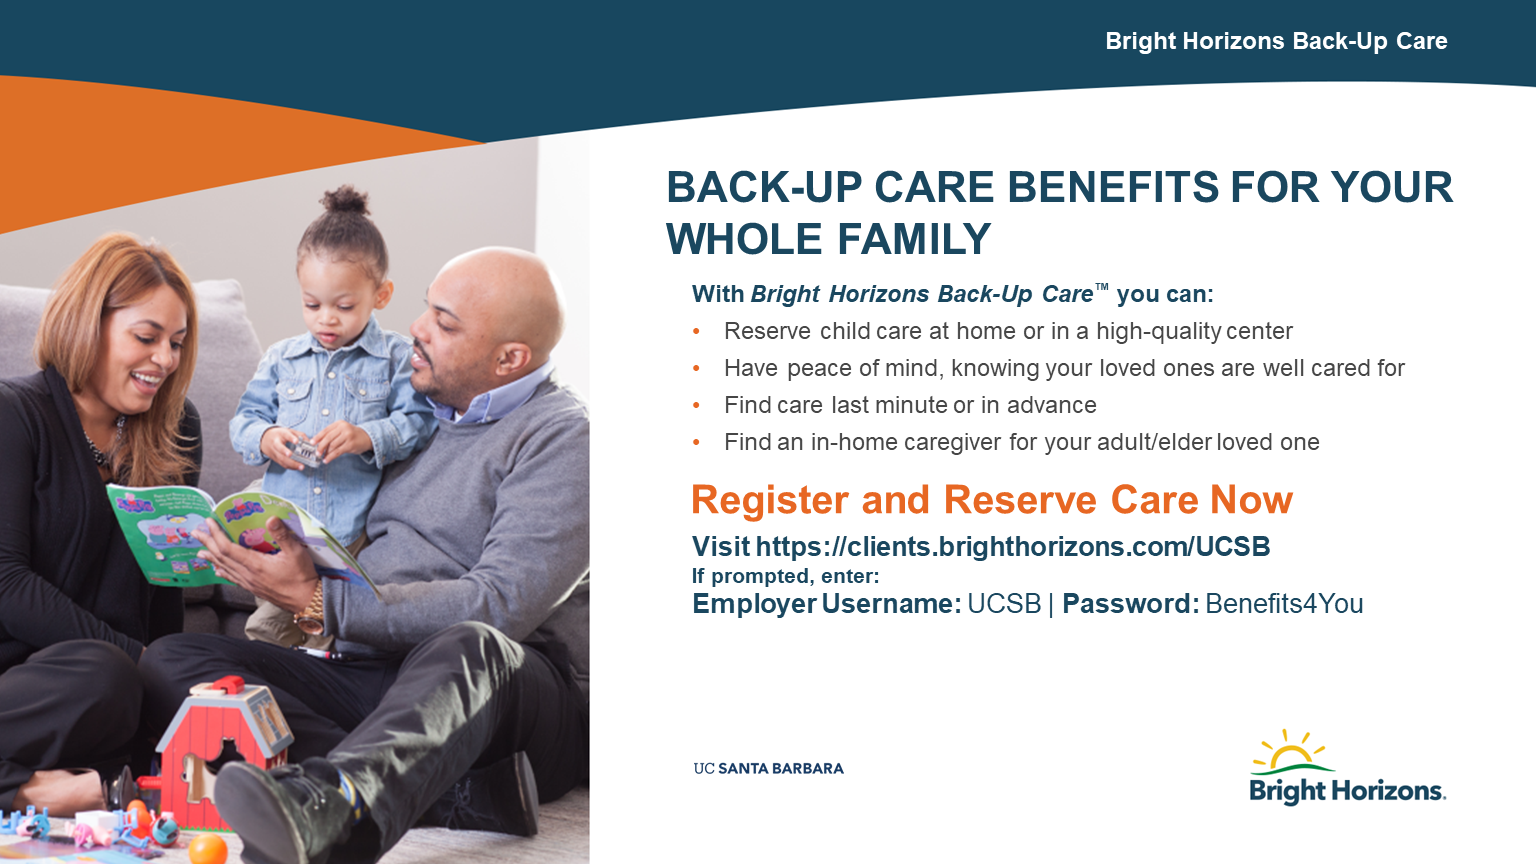 Bright Horizons Backup Care overview